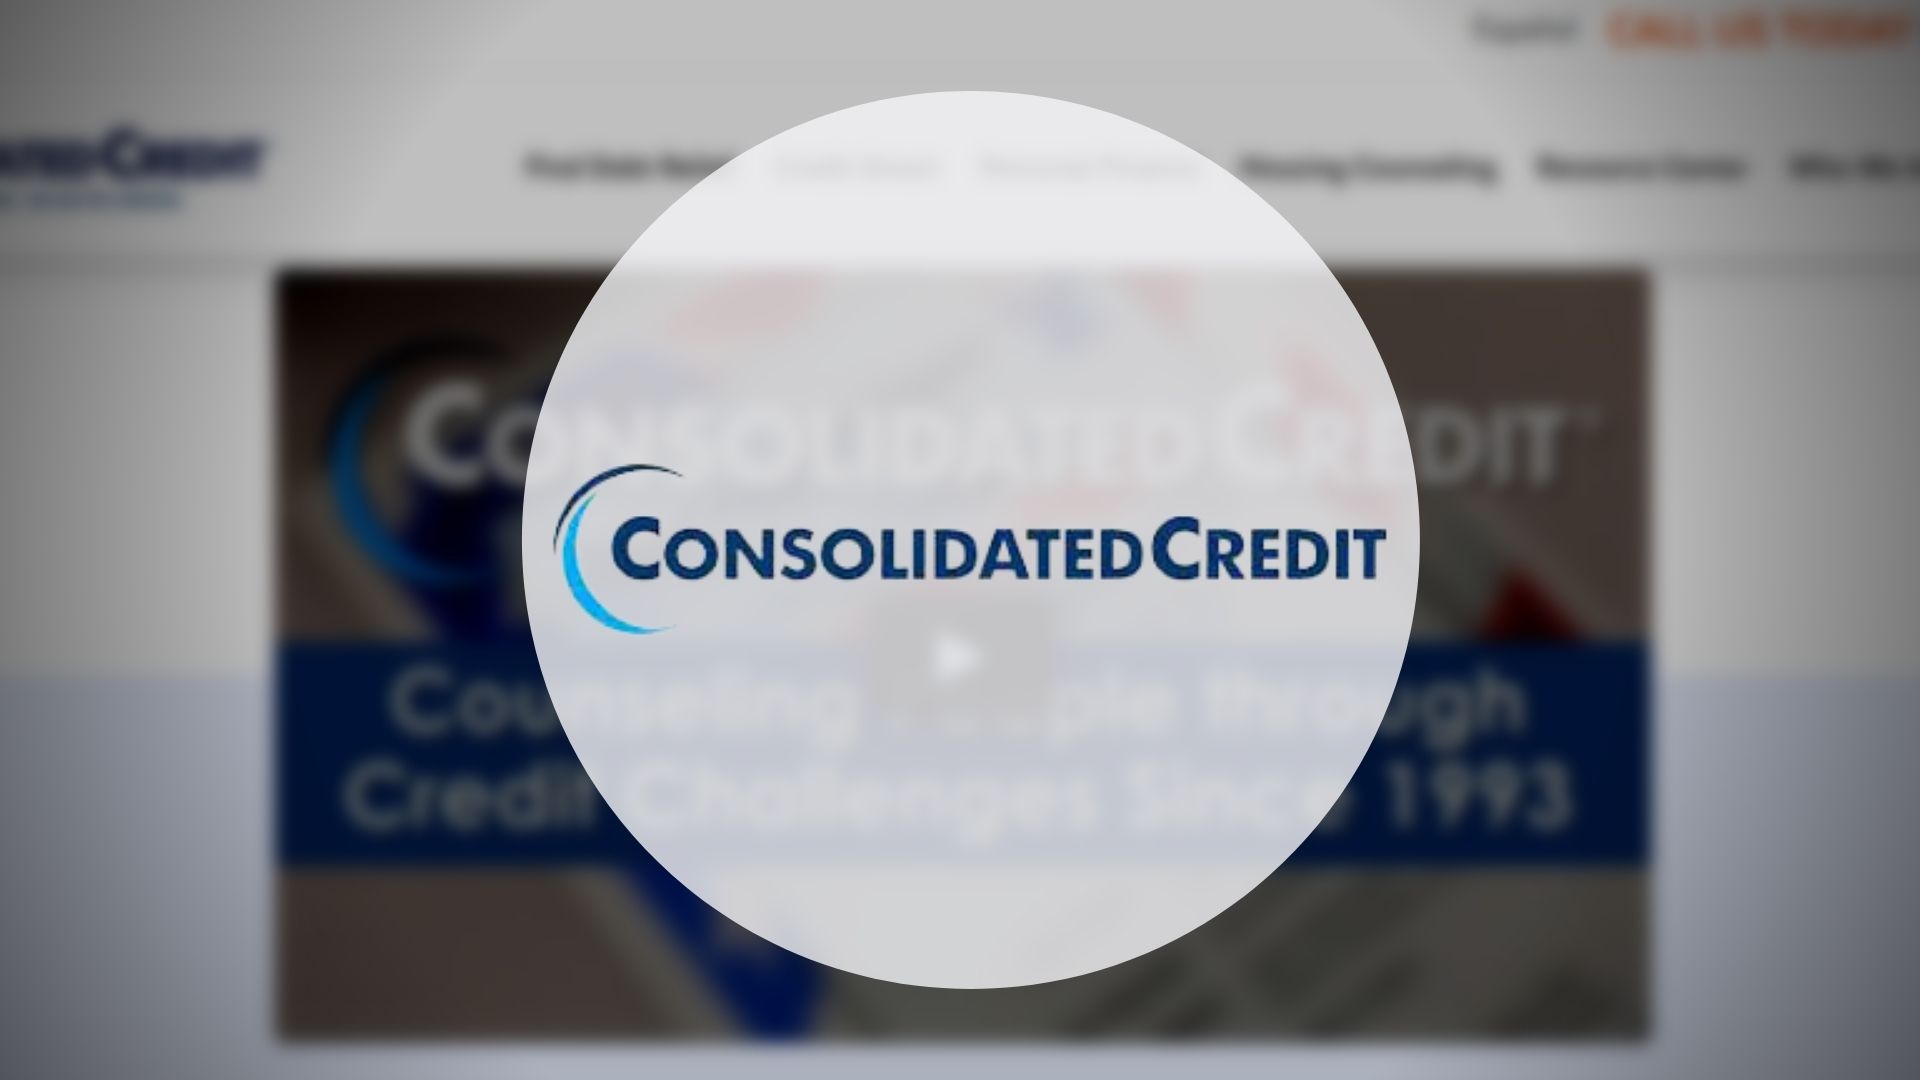 Consolidated Credit